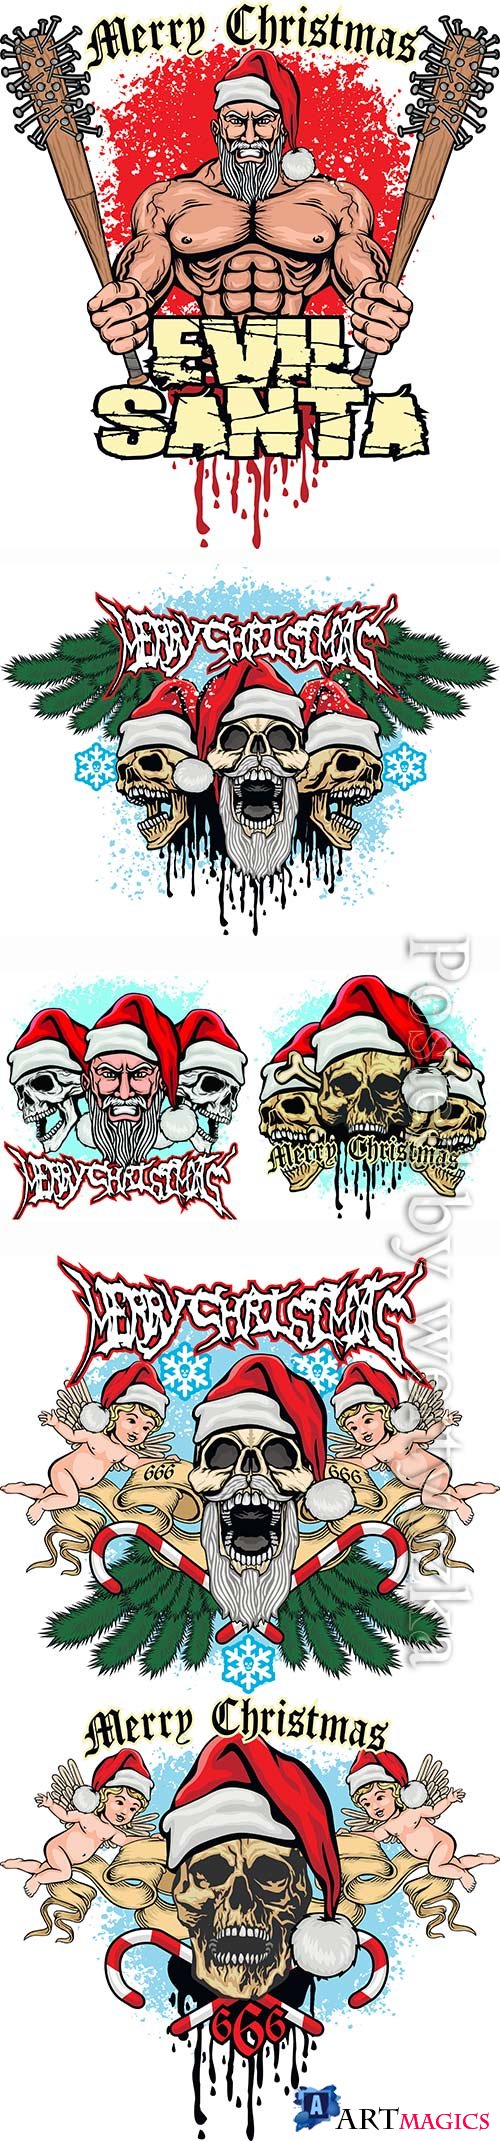 Xmas sign with skull and Santa Claus, grunge vintage design